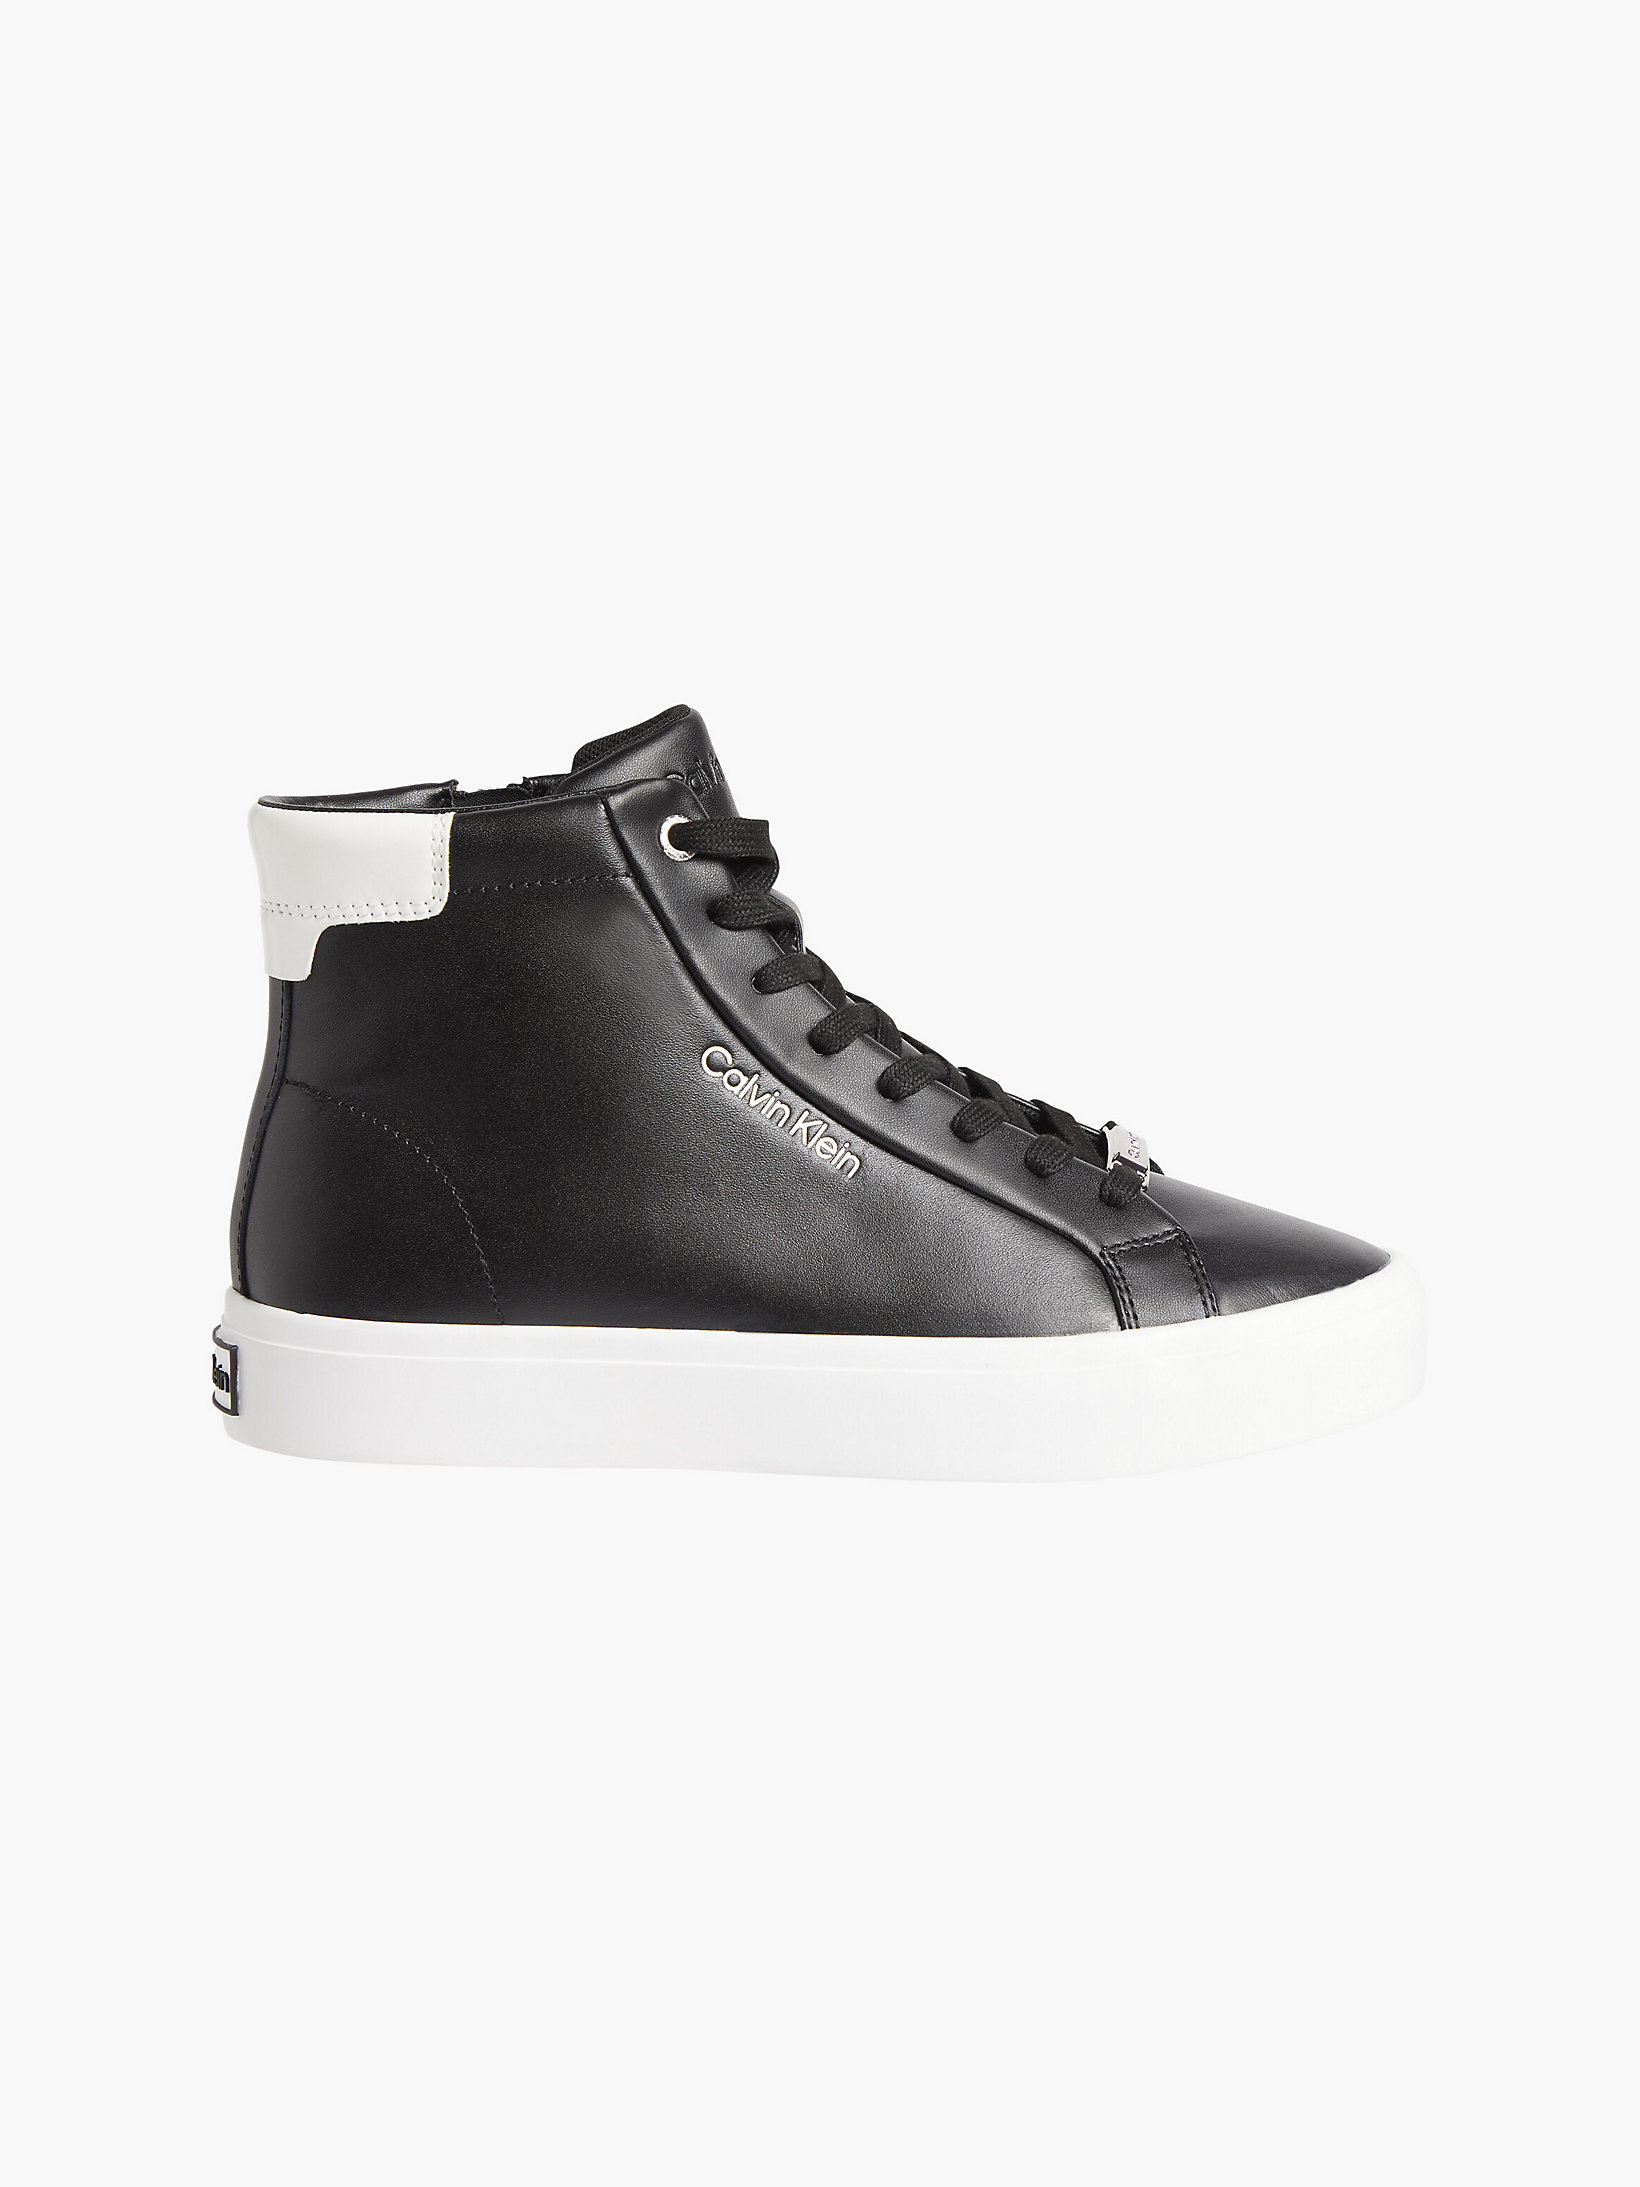 Black / White Leather High-Top Trainers undefined women Calvin Klein